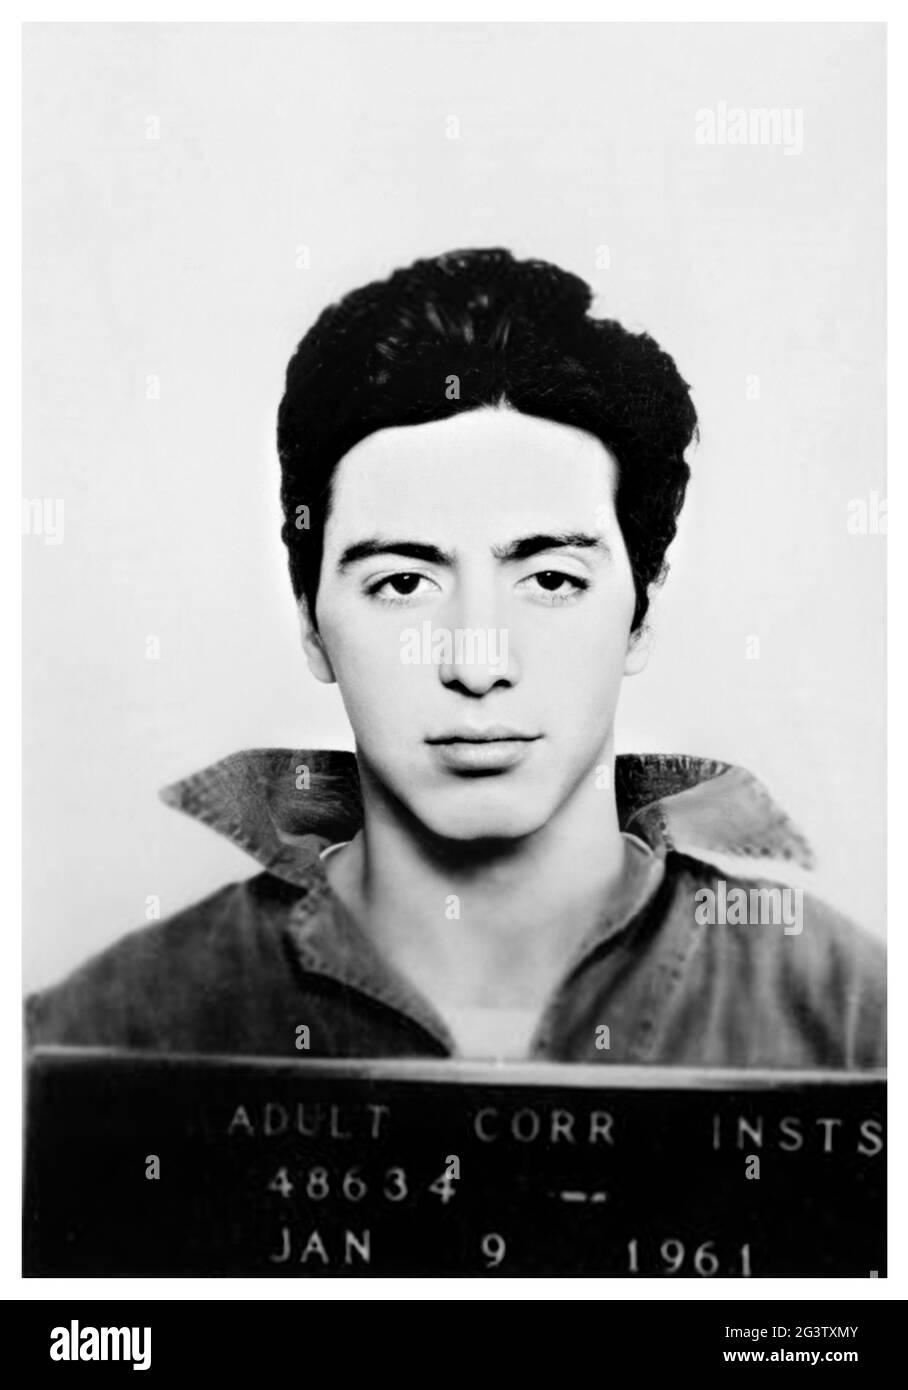 1961, 9 january , Woonsocket, Rhode Island , USA : The celebrated movie actor AL PACINO ( Alphonse , born in 1940 ) when was a teenager boy aged 20 arrested by Police Department on suspicion of Attempted Robbery in the official mug shot . Pacino reportedly spent three days in jail . Unknown photographer of Police Department of Woonsocket , Rhode Island. - HISTORY - FOTO STORICHE - personalità da giovani giovane - personality personalities when was young - gioventù - giovinezza - ATTORE - MOVIE - CINEMA - TEATRO - THEATRE - ARRESTO - Arrestation - ARRESTATO DALLA POLIZIA - FOTO SEGNALETICA - mu Stock Photo